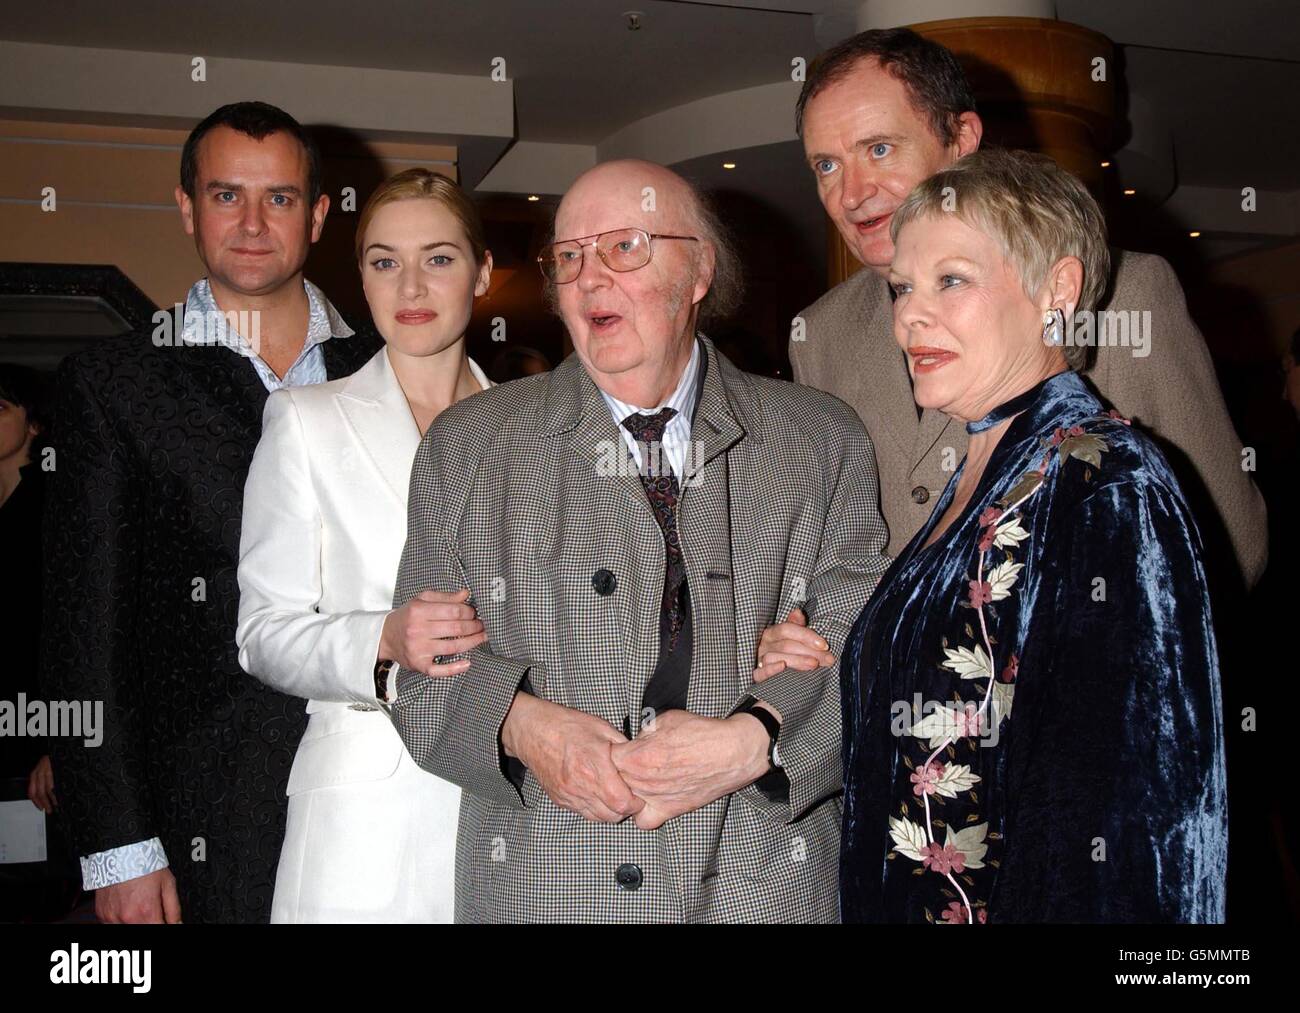 John Bayley (C) husband of the late Dame Iris Murdoch, with stars of the film, (L-R) Hugh Bonneville, Kate Winslet, Jim Broadbent and Dame Judi Dench during a press reception at the Washington Hotel in central London, ahead of the premiere of 'Iris' at the Curzon Mayfair. * The film follows the story of Booker Prize-winning novelist and philosopher Iris Murdoch who died in 1999, played by Kate Winslet and Judi Dench. Stock Photo